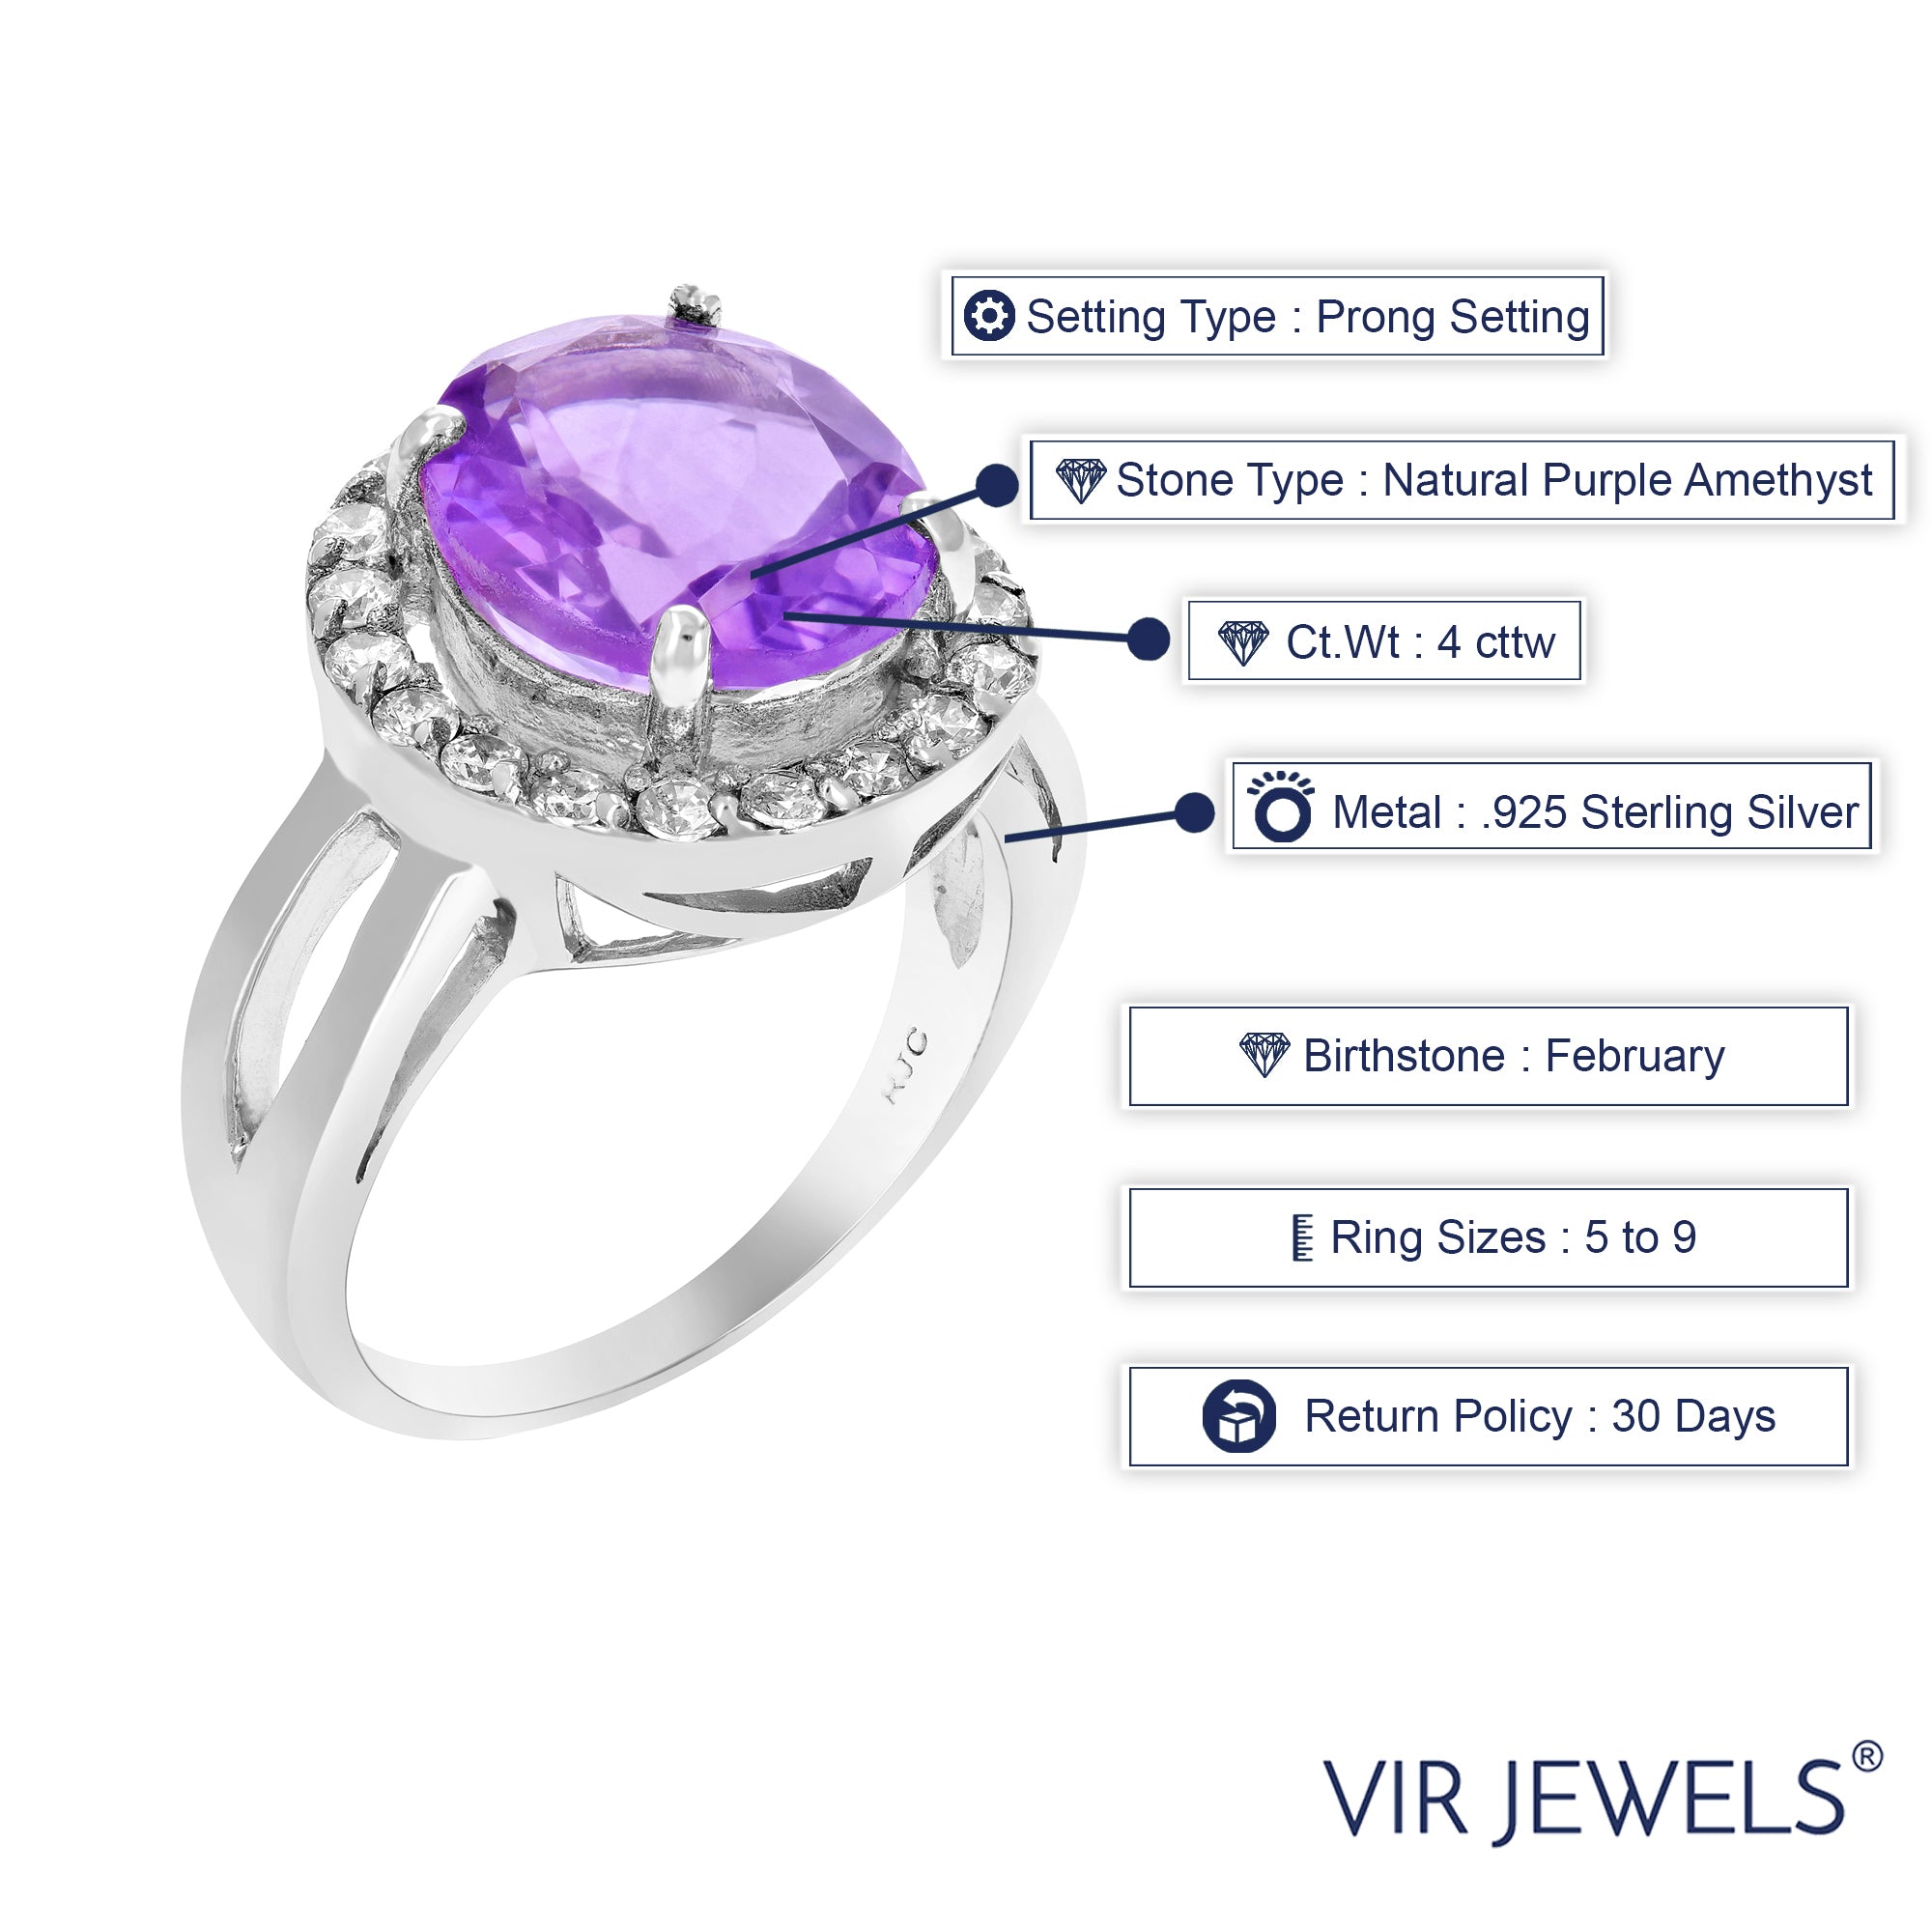 4 cttw Purple Amethyst Ring .925 Sterling Silver with Rhodium Oval 12x10 MM